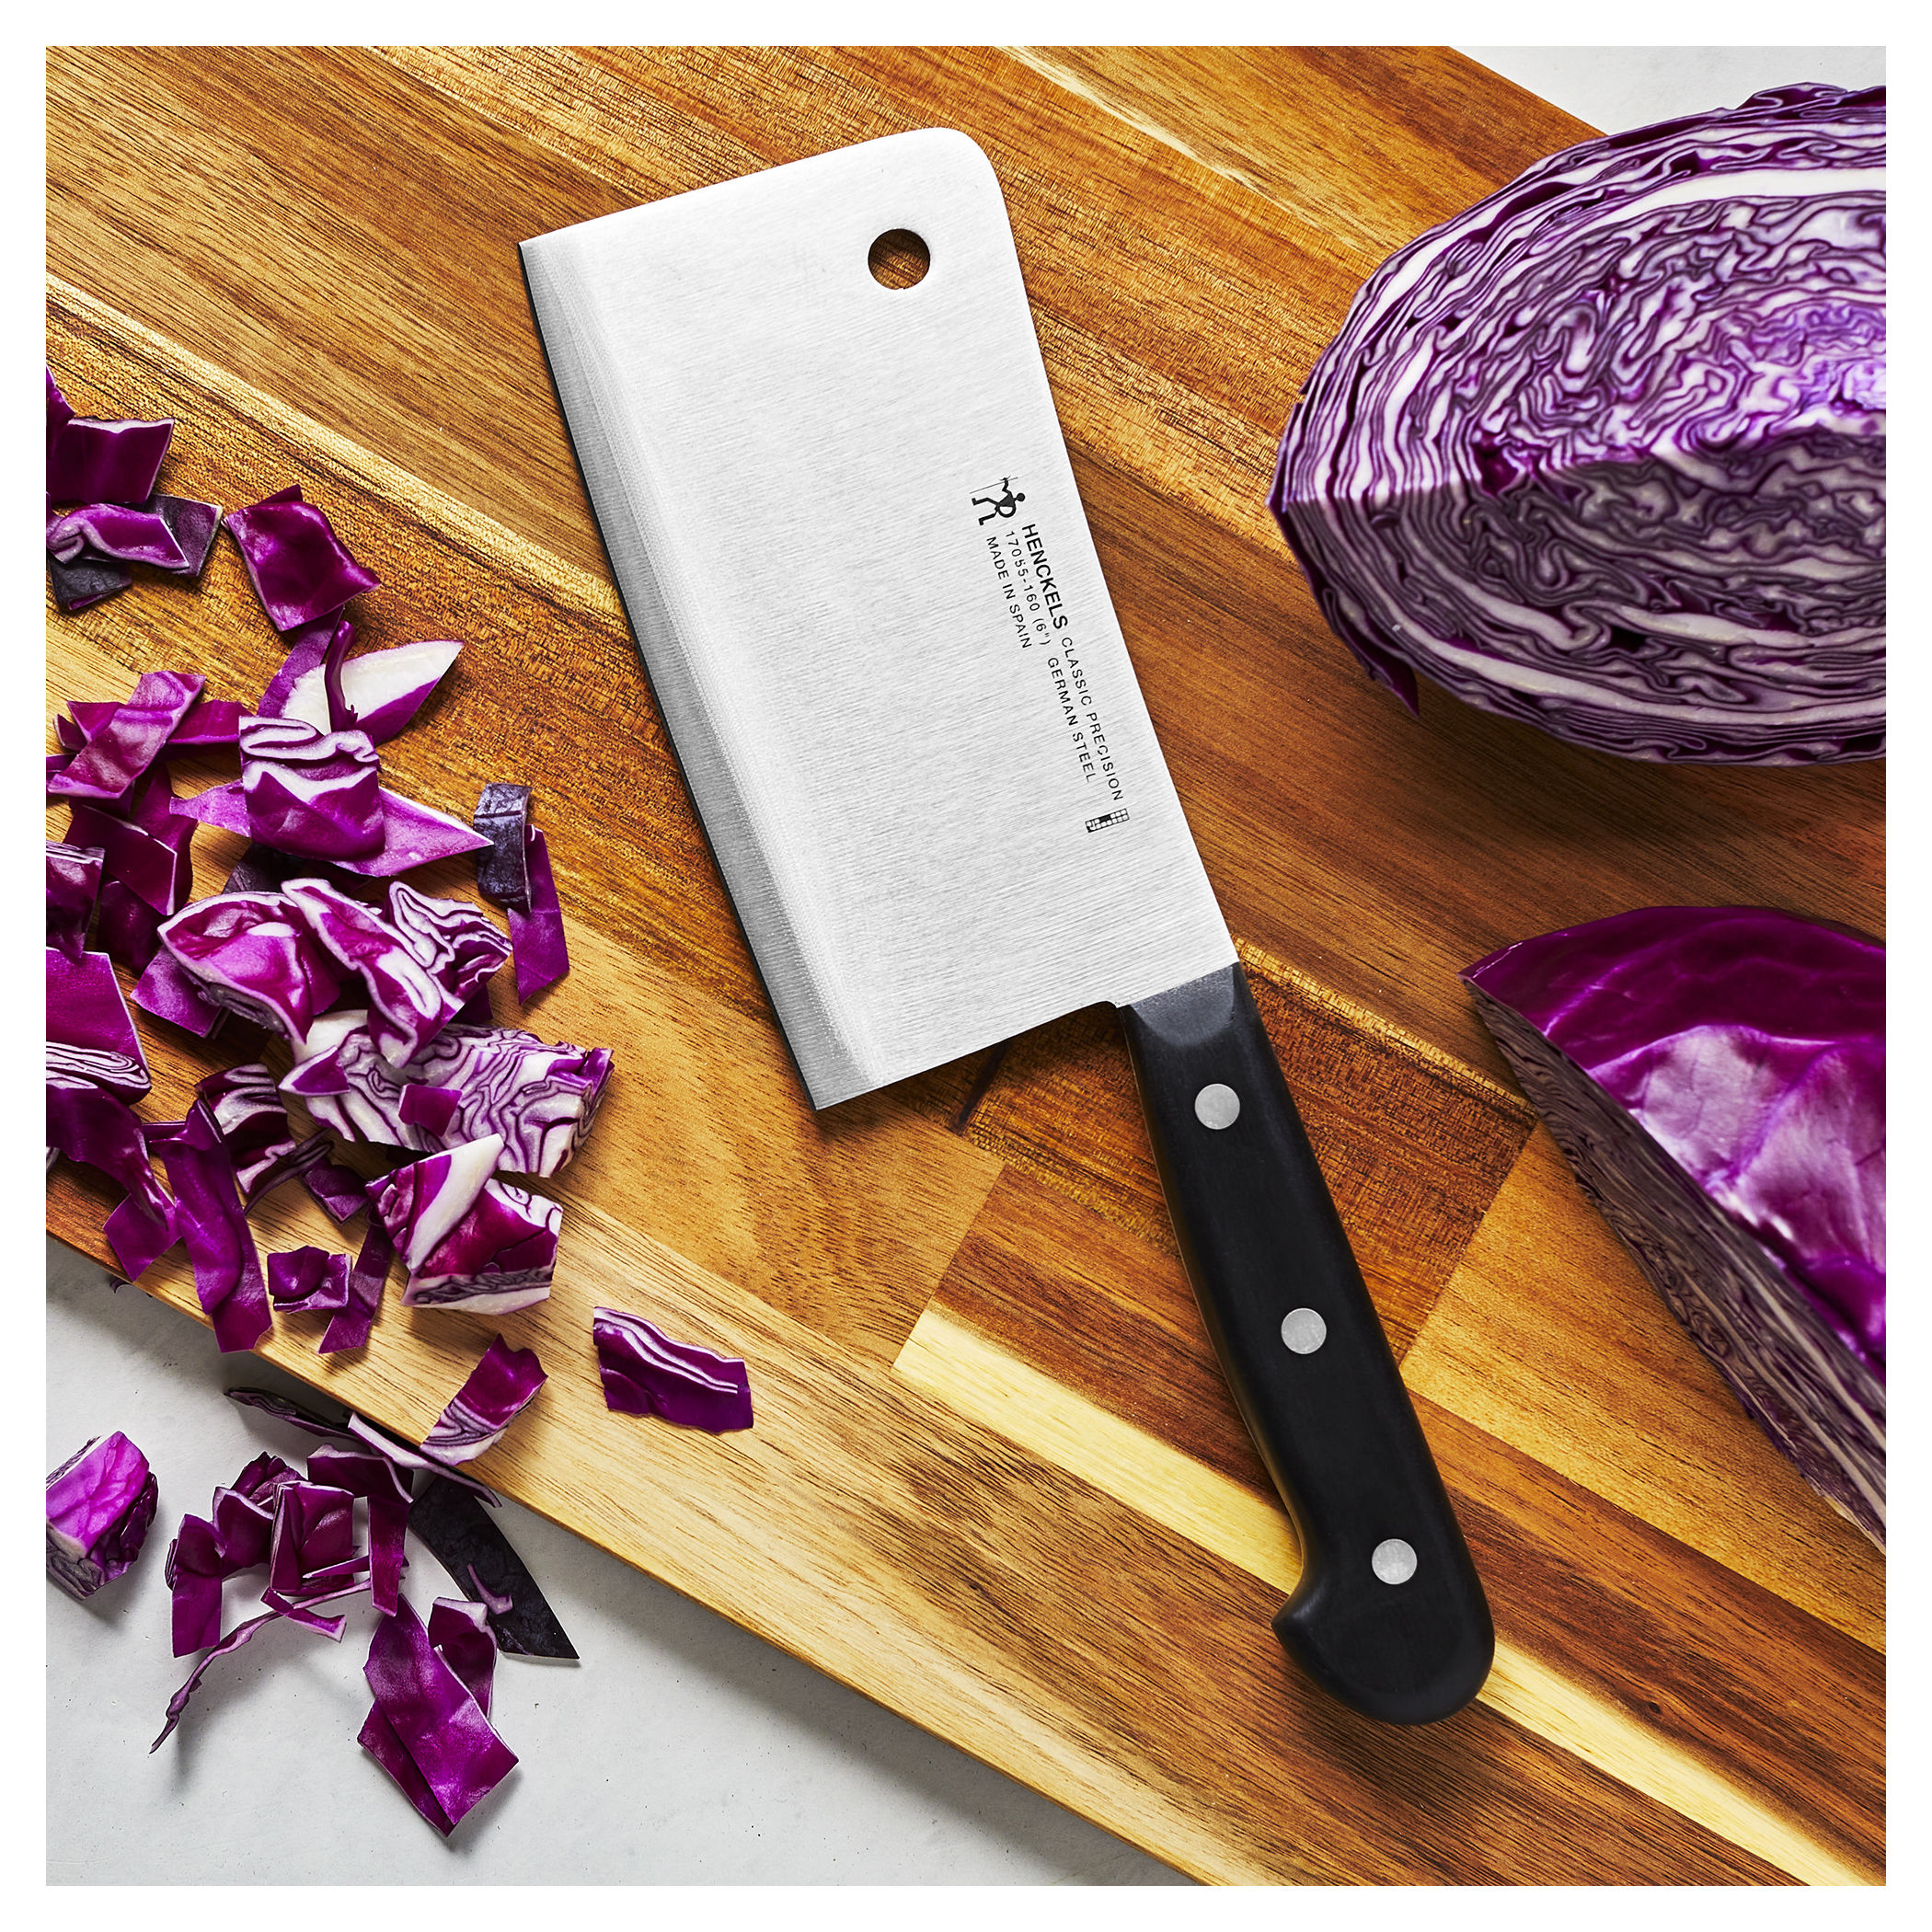 Buy Henckels Classic Precision Chef's knife